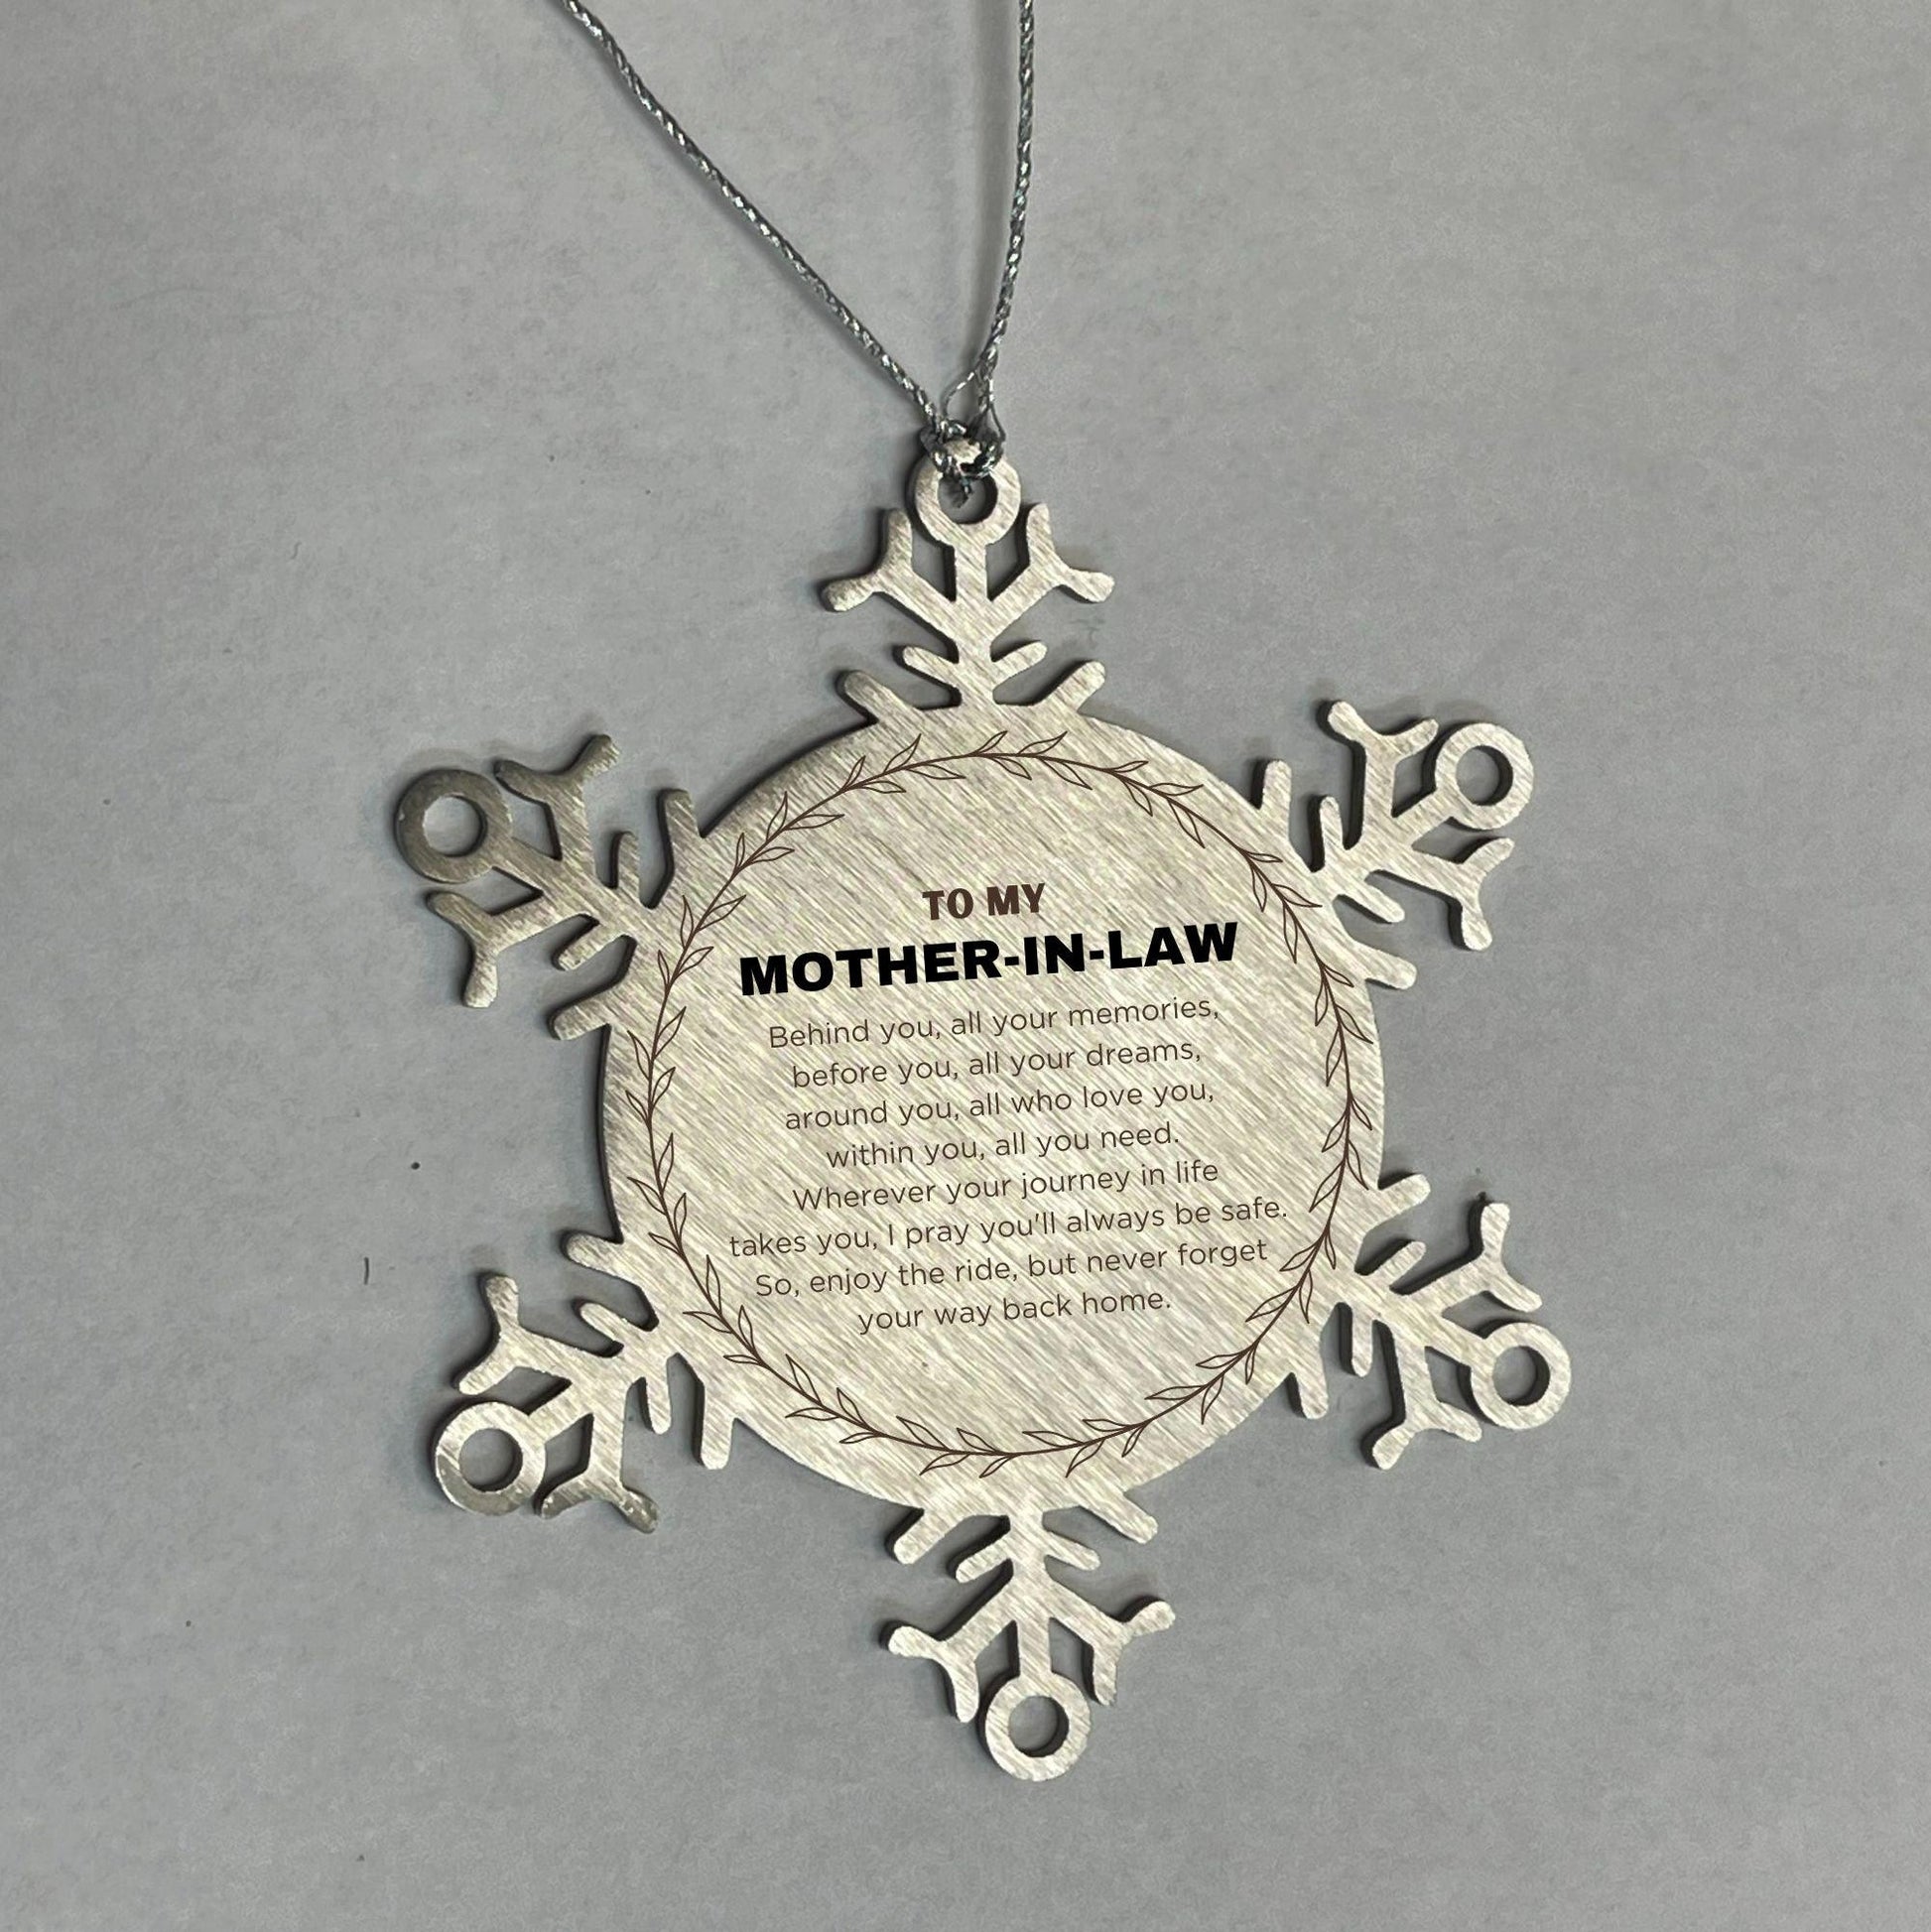 Inspirational Mother-In-Law Snowflake Ornament - Behind you, all your Memories, Before you, all your Dreams - Birthday, Christmas Holiday Gifts - Mallard Moon Gift Shop